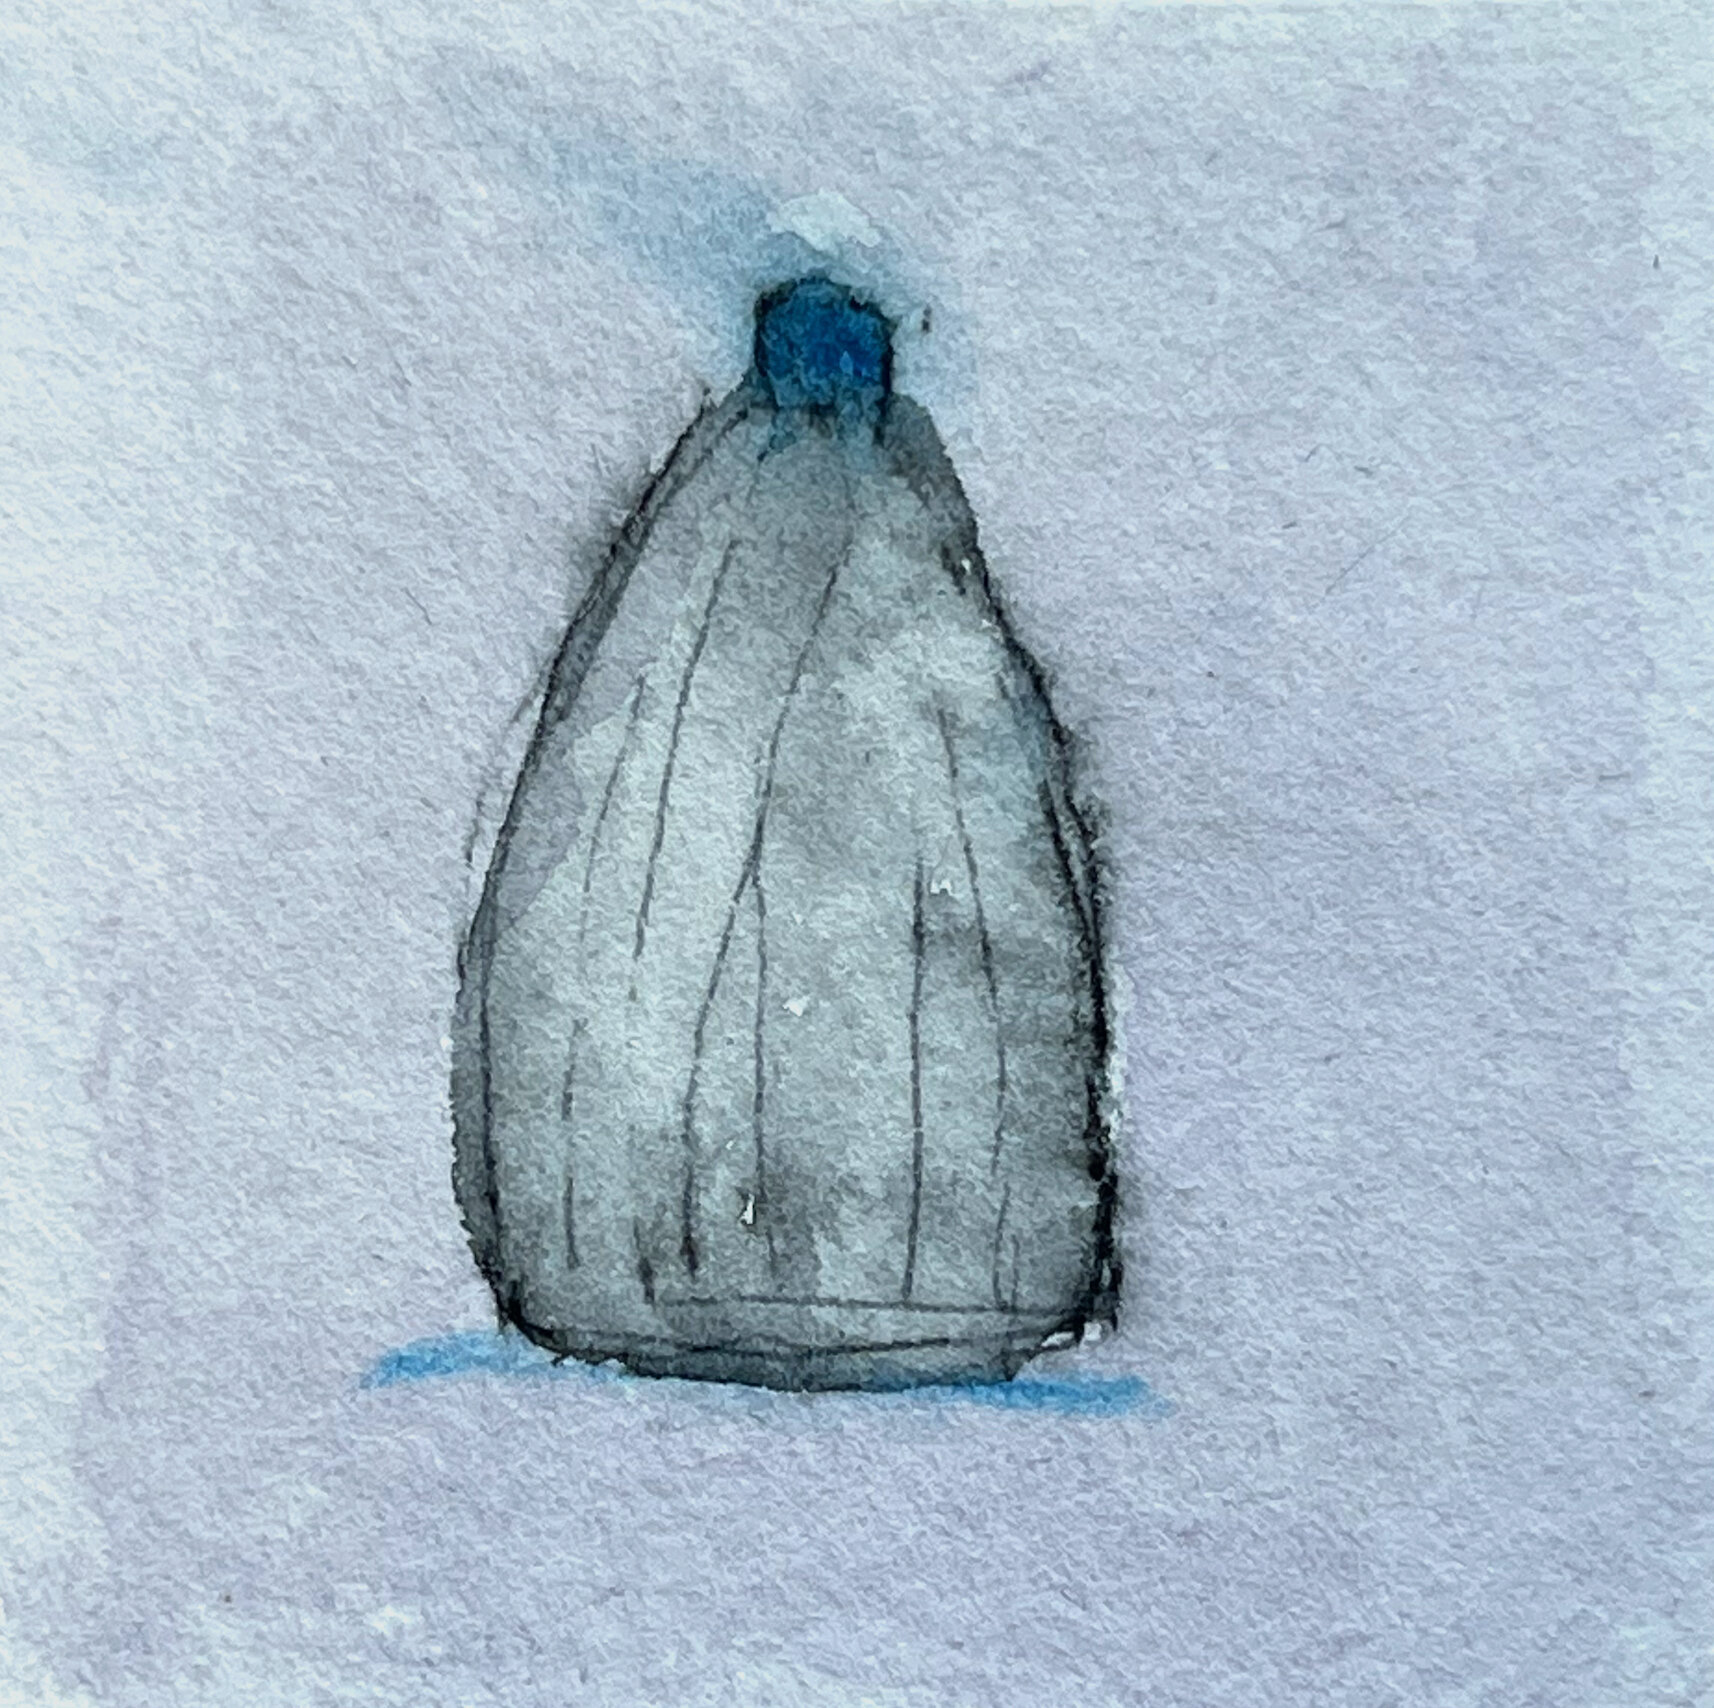 Lynn Beldner, Lost My Blue Hat, 2021, Watercolor and ink, 2 x 2"